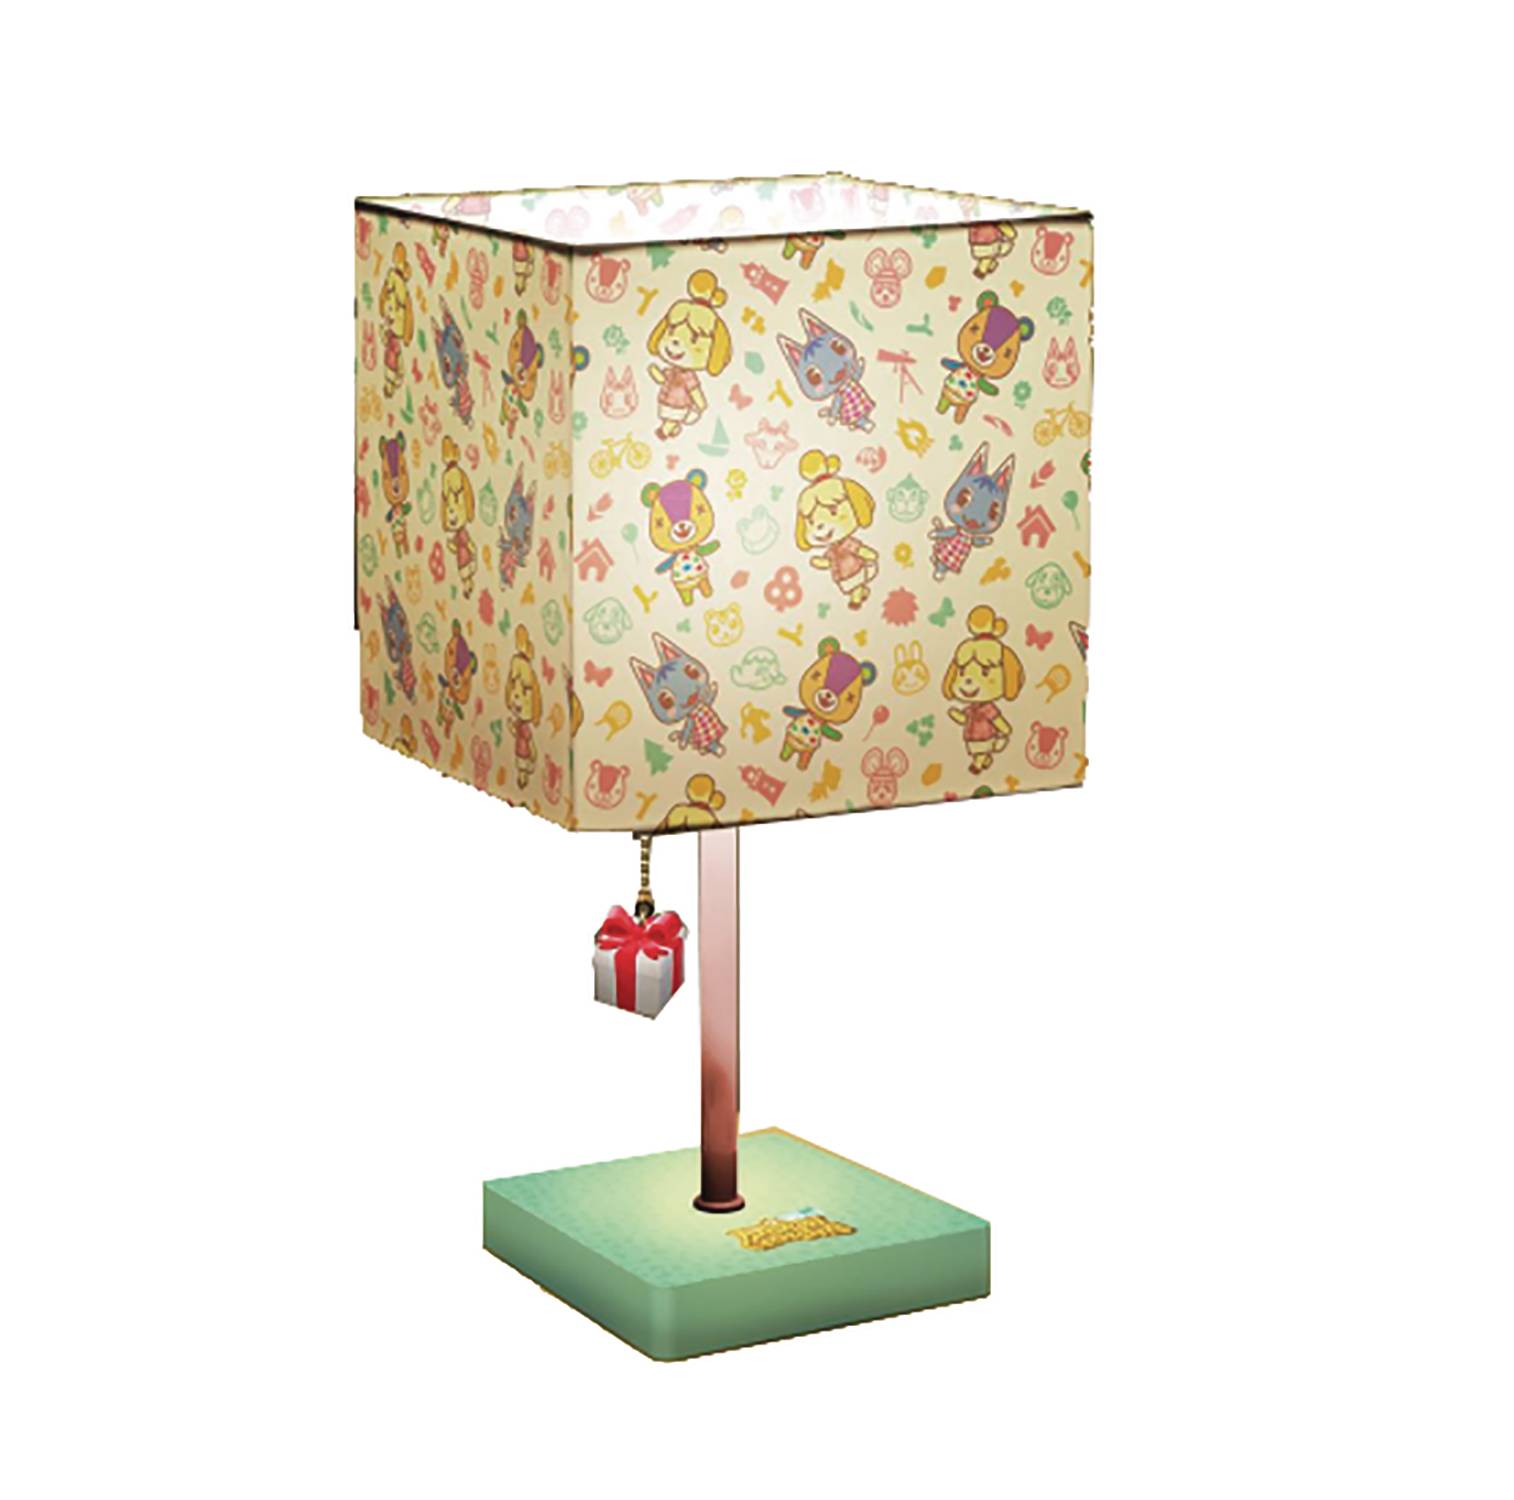 APR228827 - ANIMAL CROSSING ISABELLE LAMP - Previews World